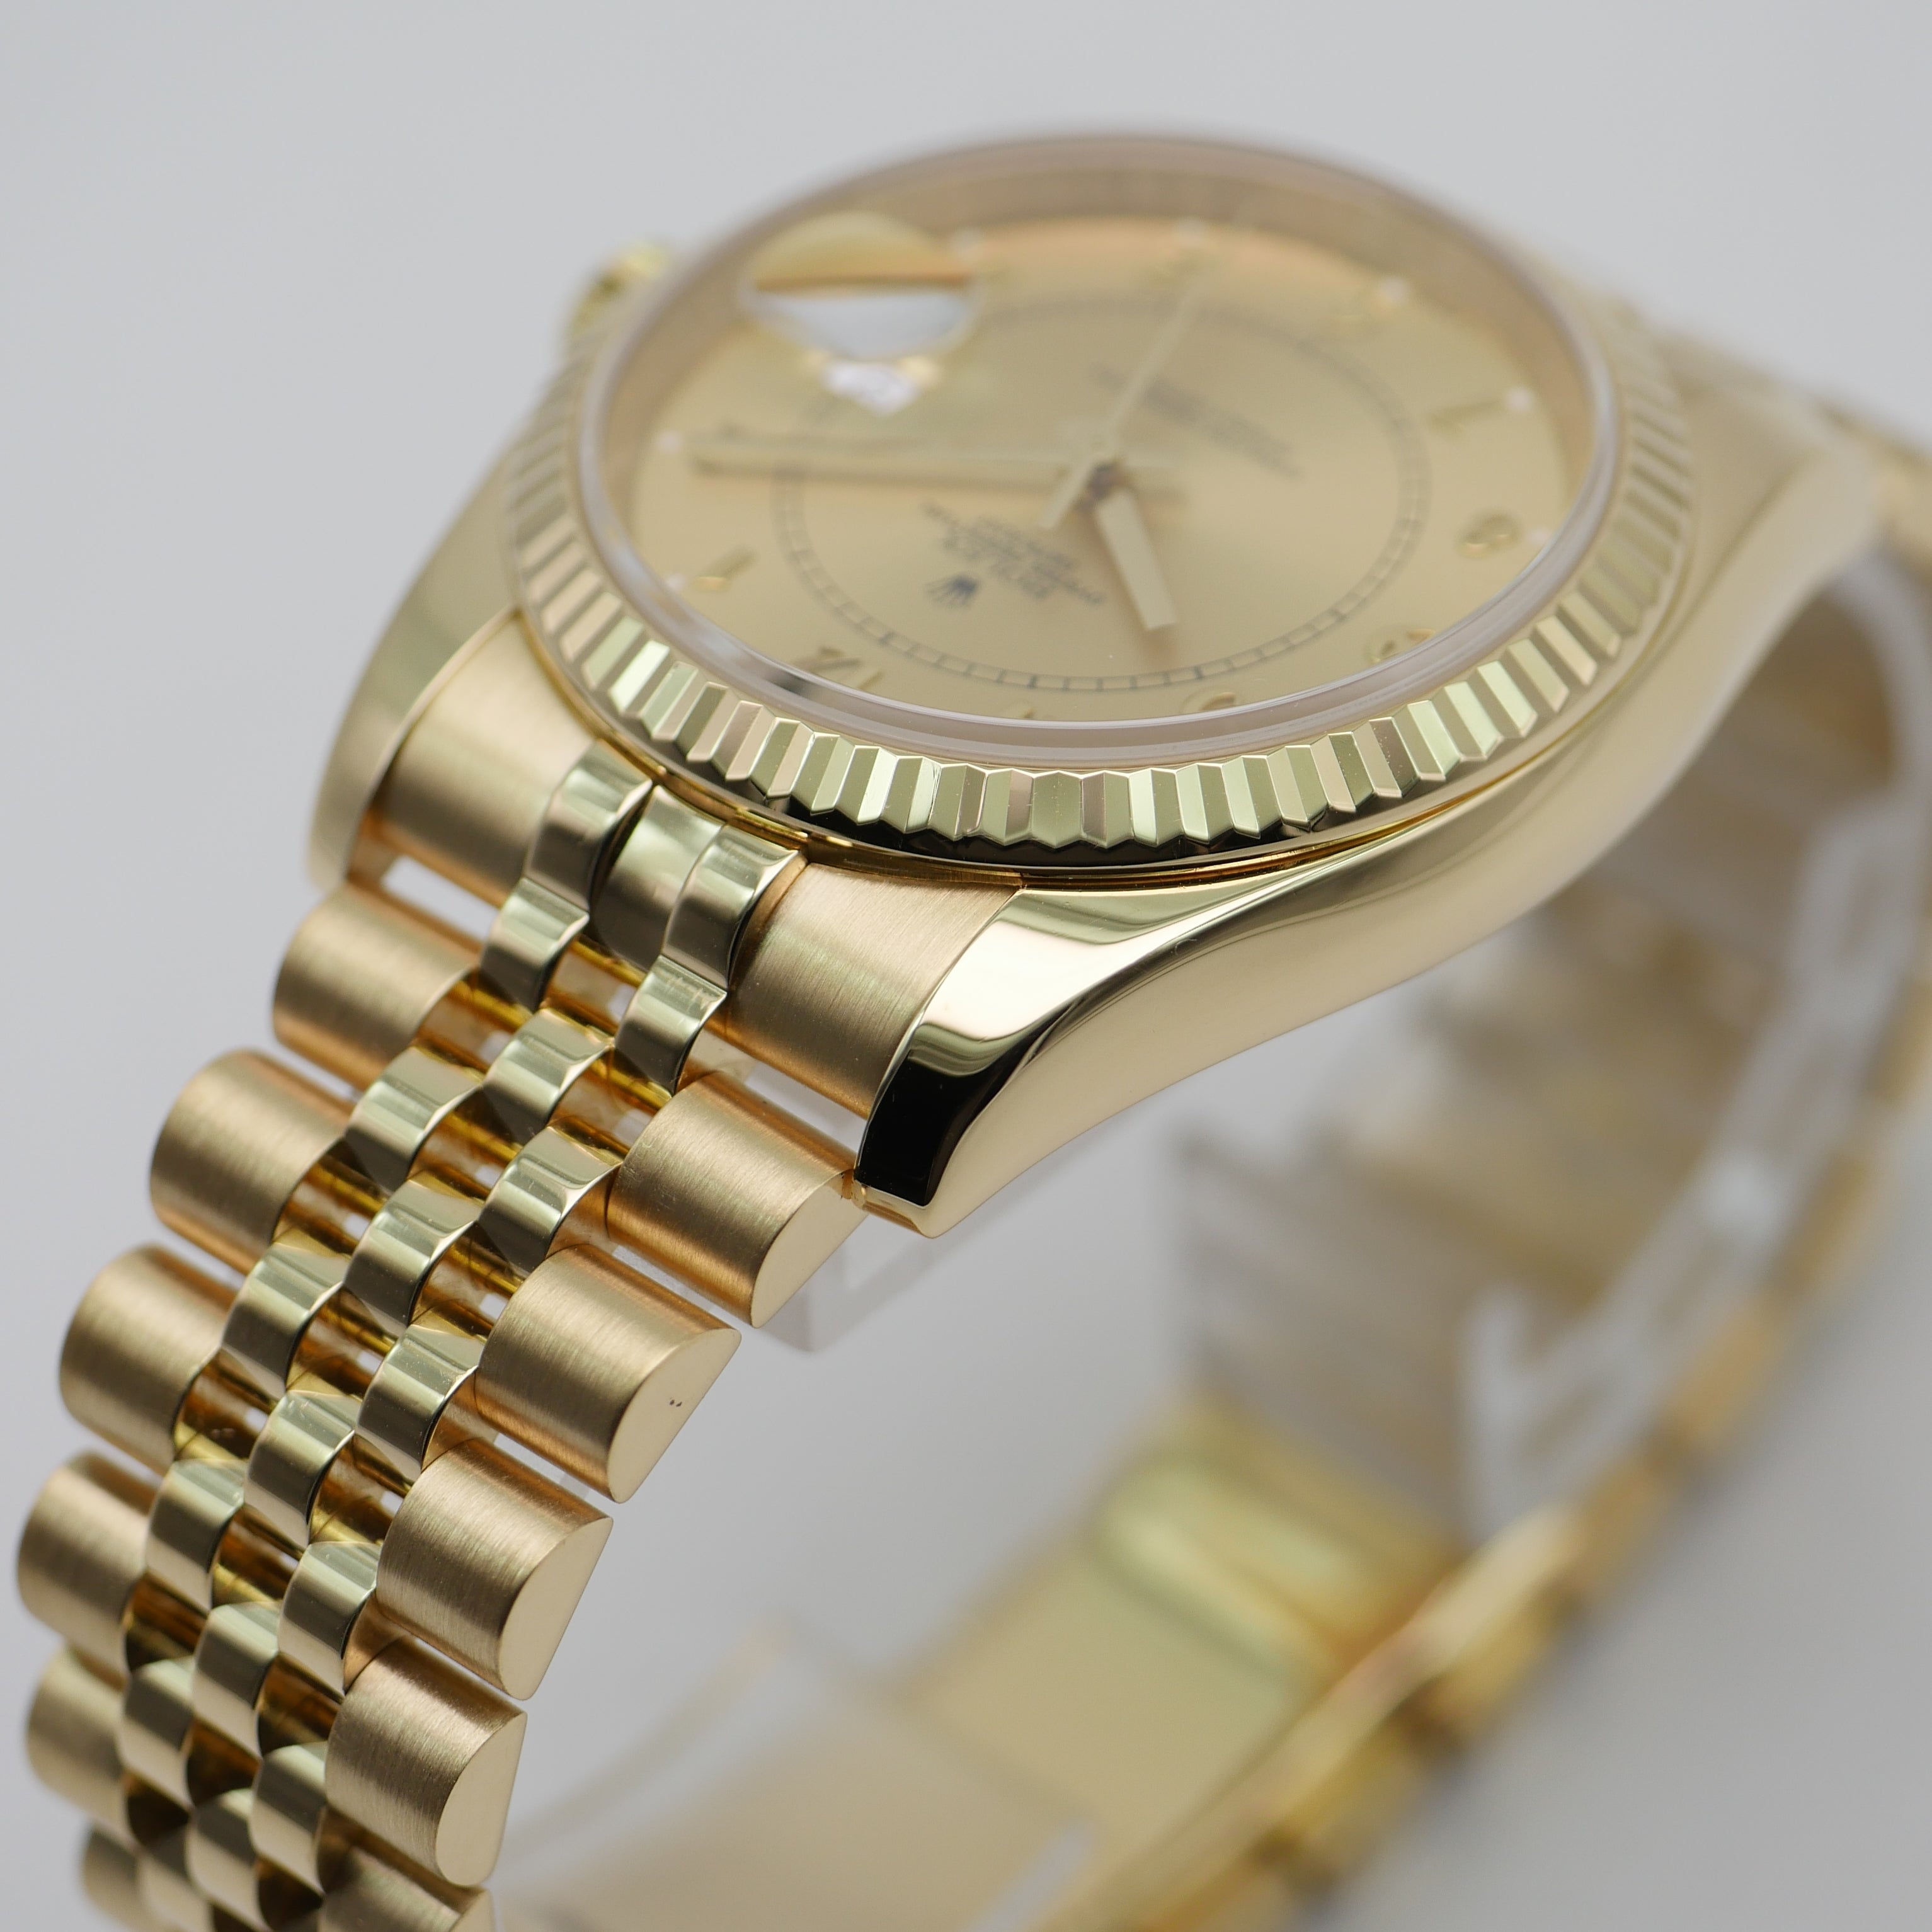 Rolex Datejust 36 Yellow Gold "Onyx Dial" 116238 - 2009